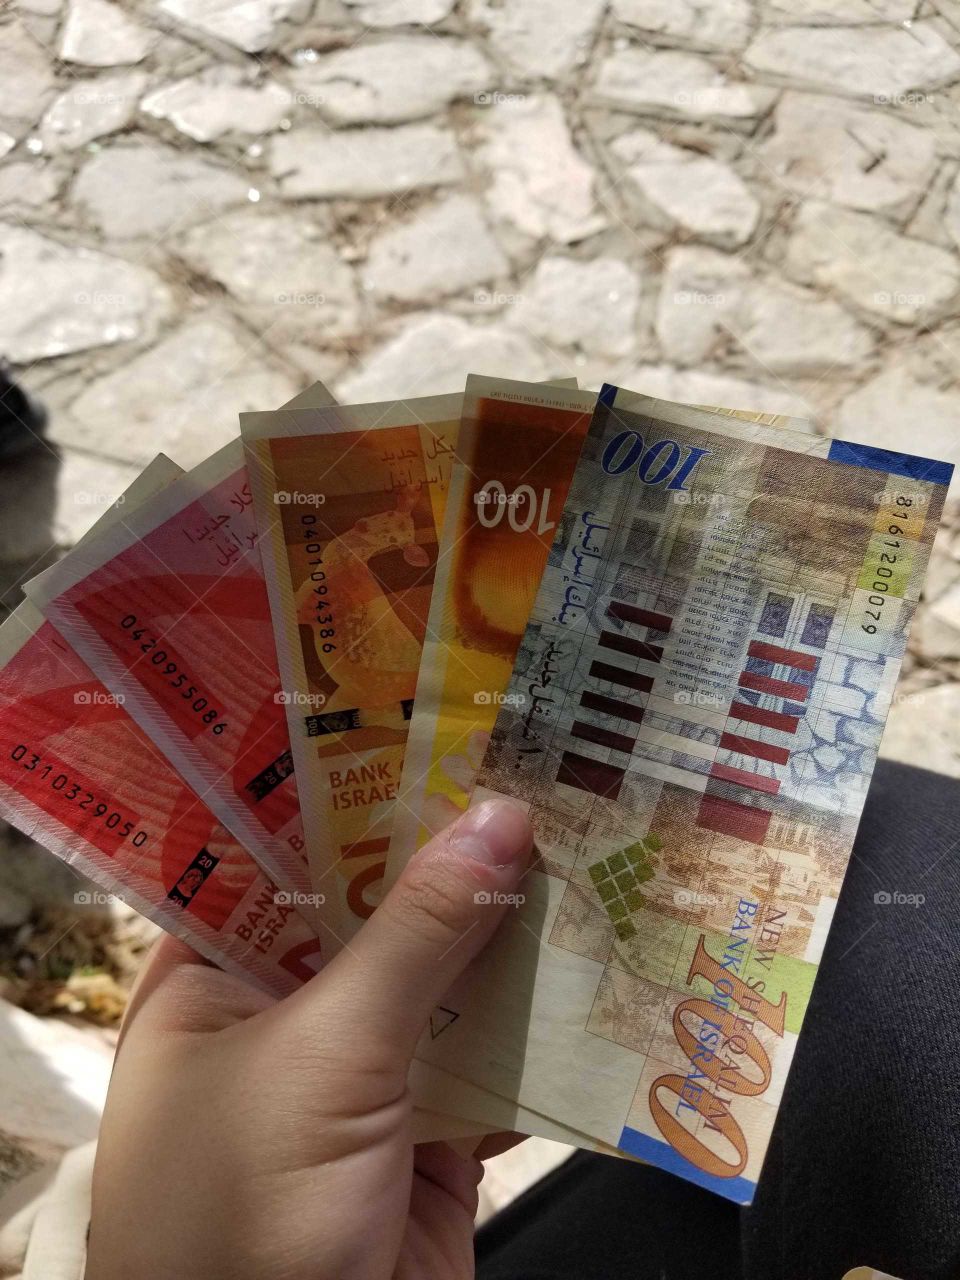 These are Israeli Shekels. They are different colors, these ones are red, orange, and blue notes. This would amount to 340 Shekels.